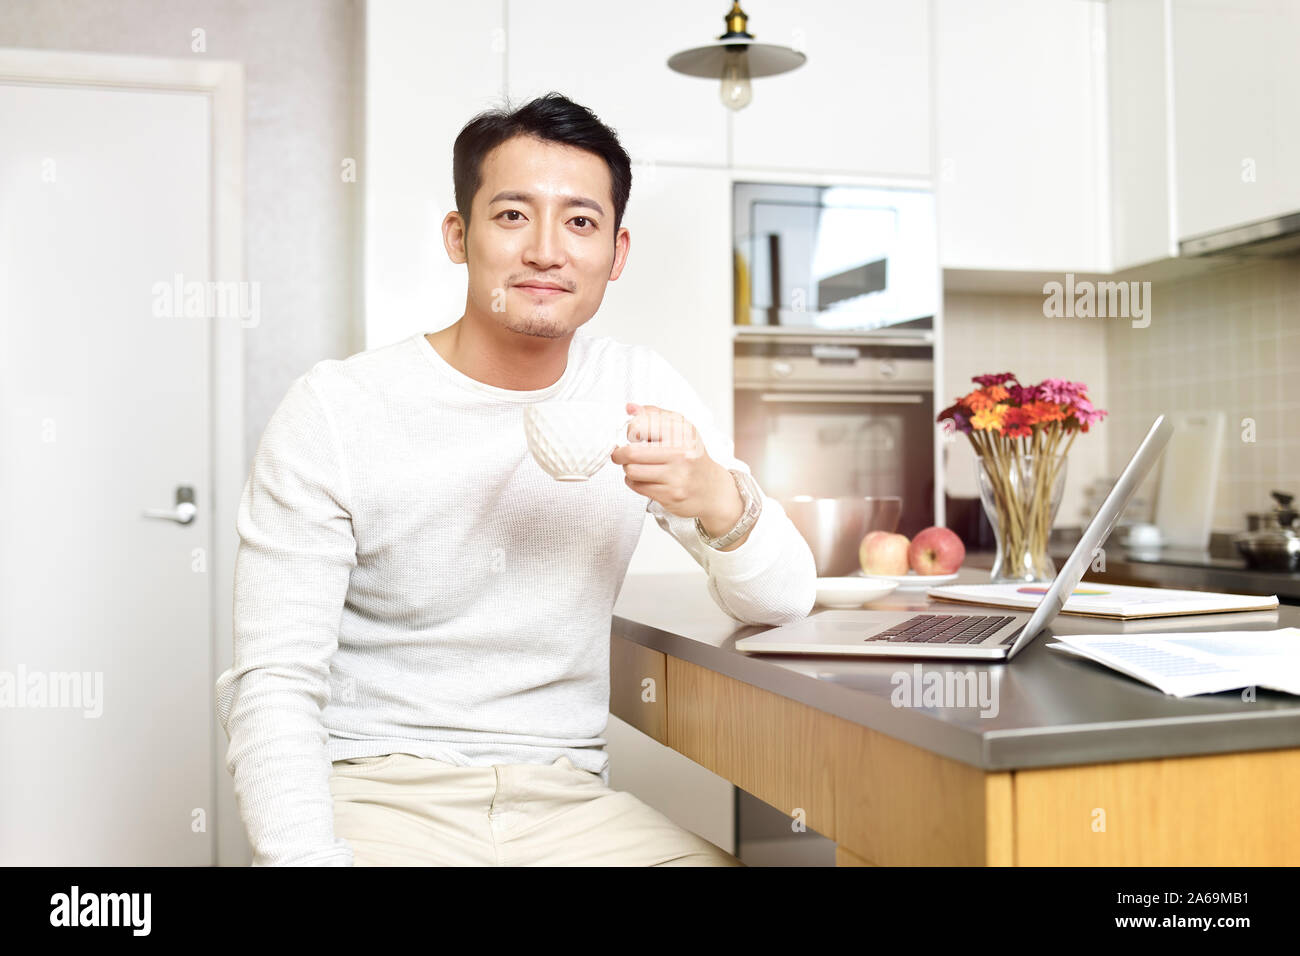 portrait of a young asian man working from home holding a cup of coffee looking at camera smiling Stock Photo